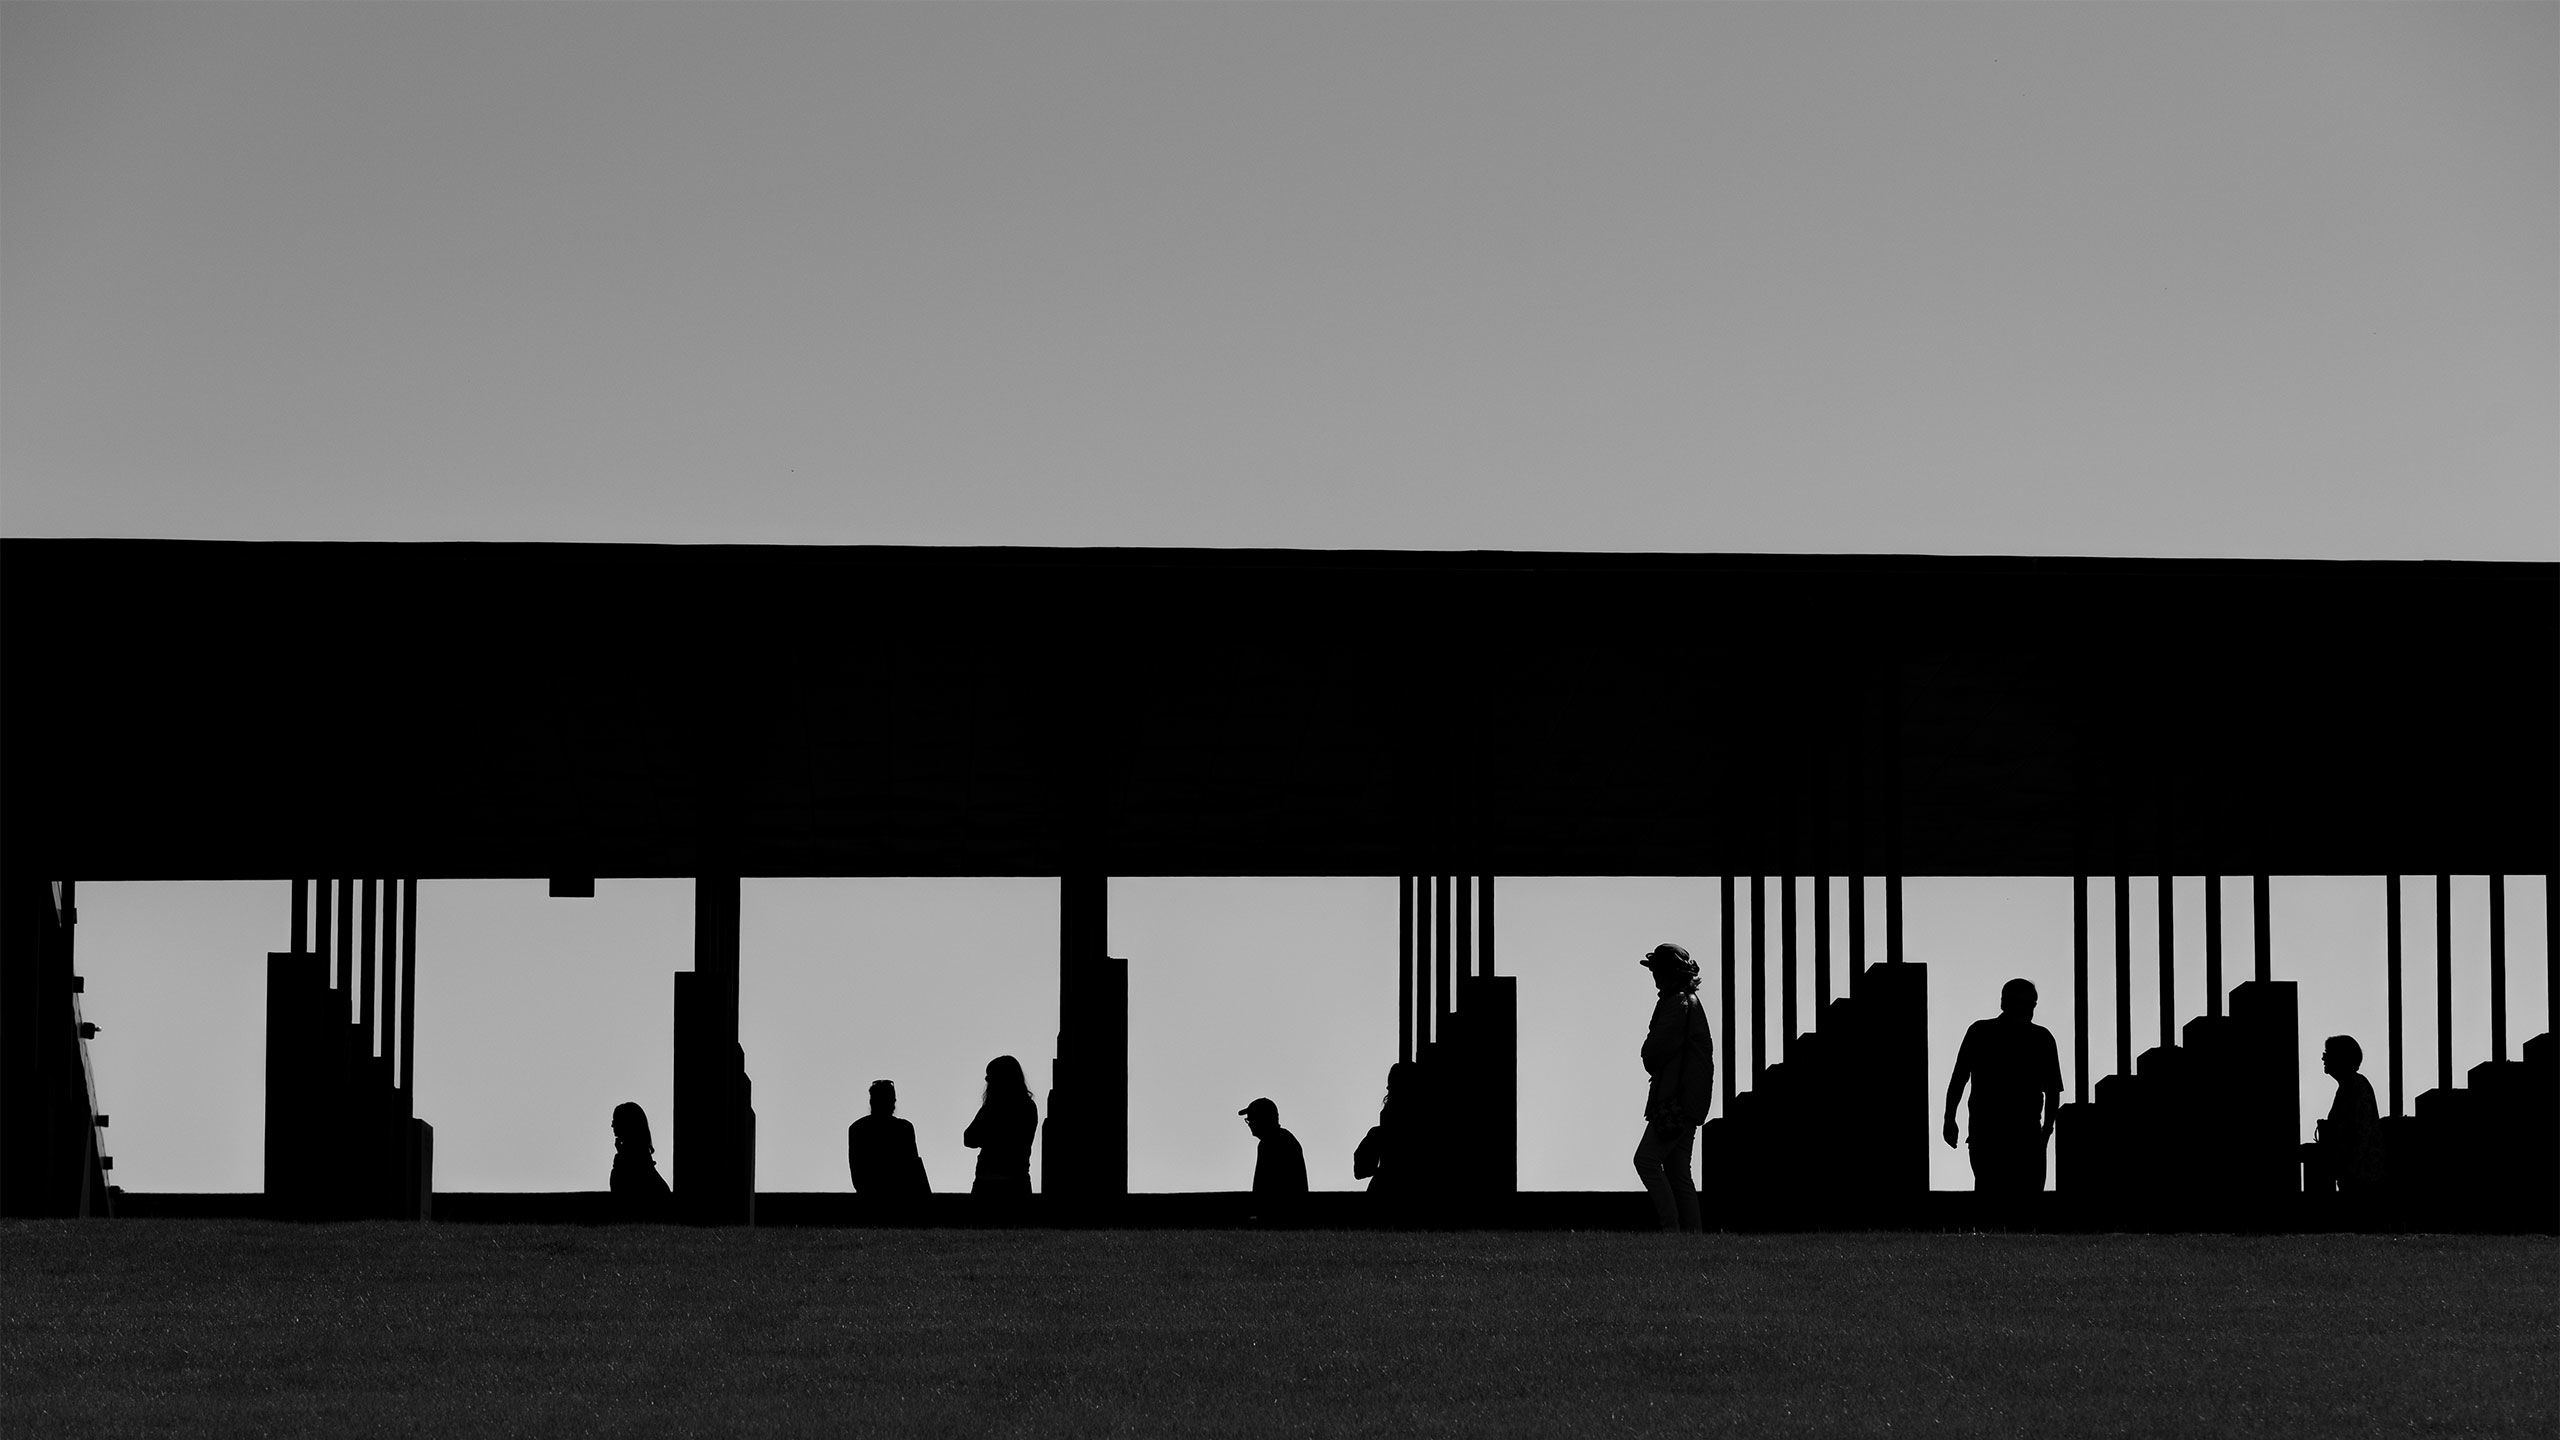 A photo taken from a distance shows people in silhouette visiting the National Memorial for Peace and Justice, standing among concrete columns.